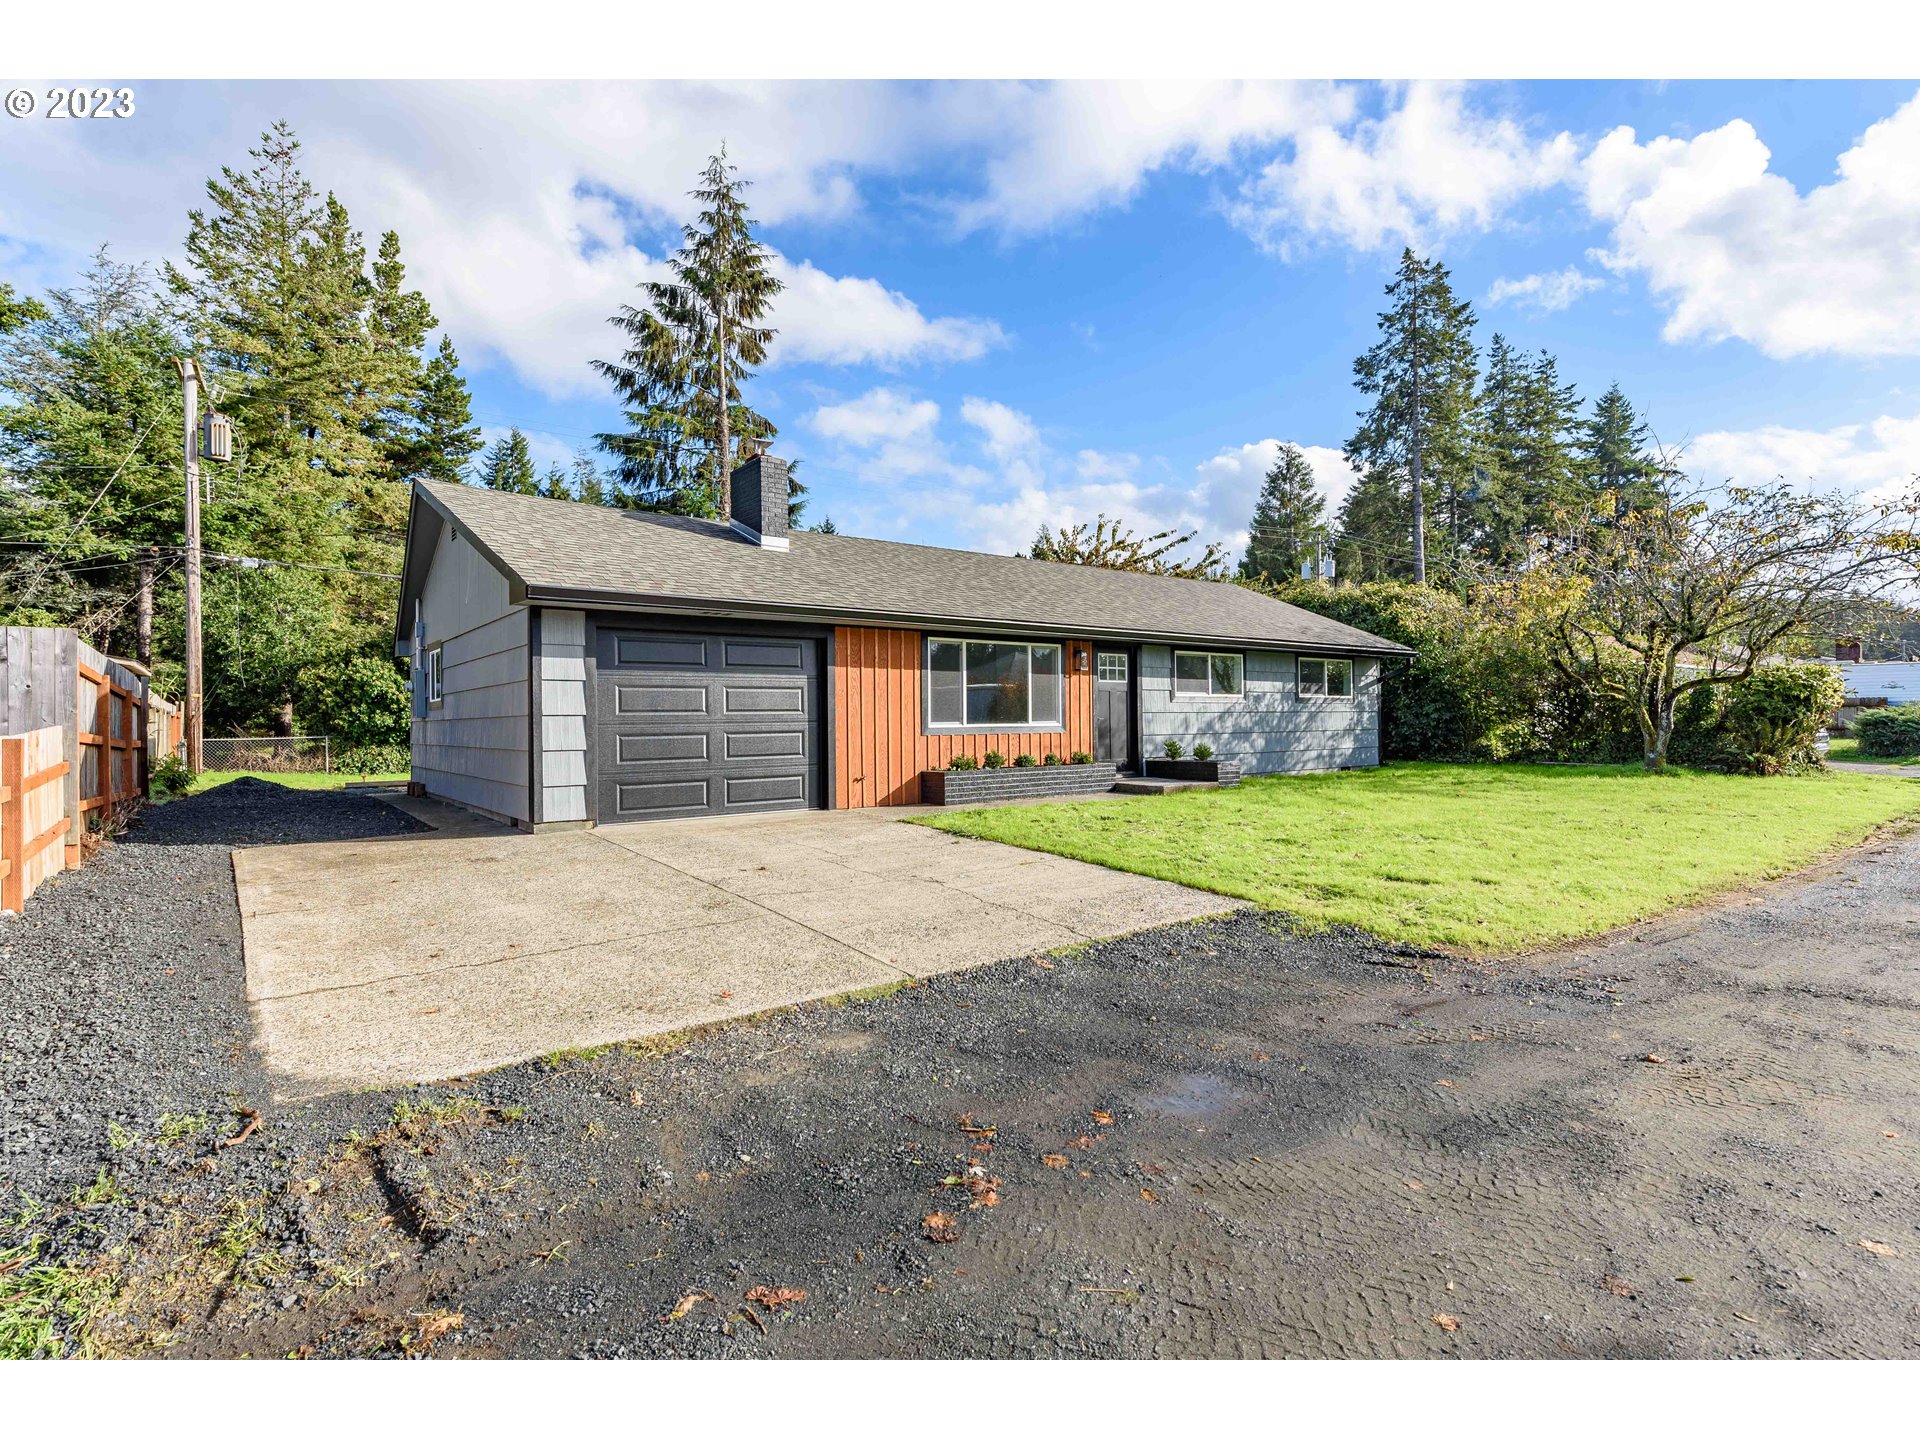 3743 PACIFIC AVE, North Bend, OR 